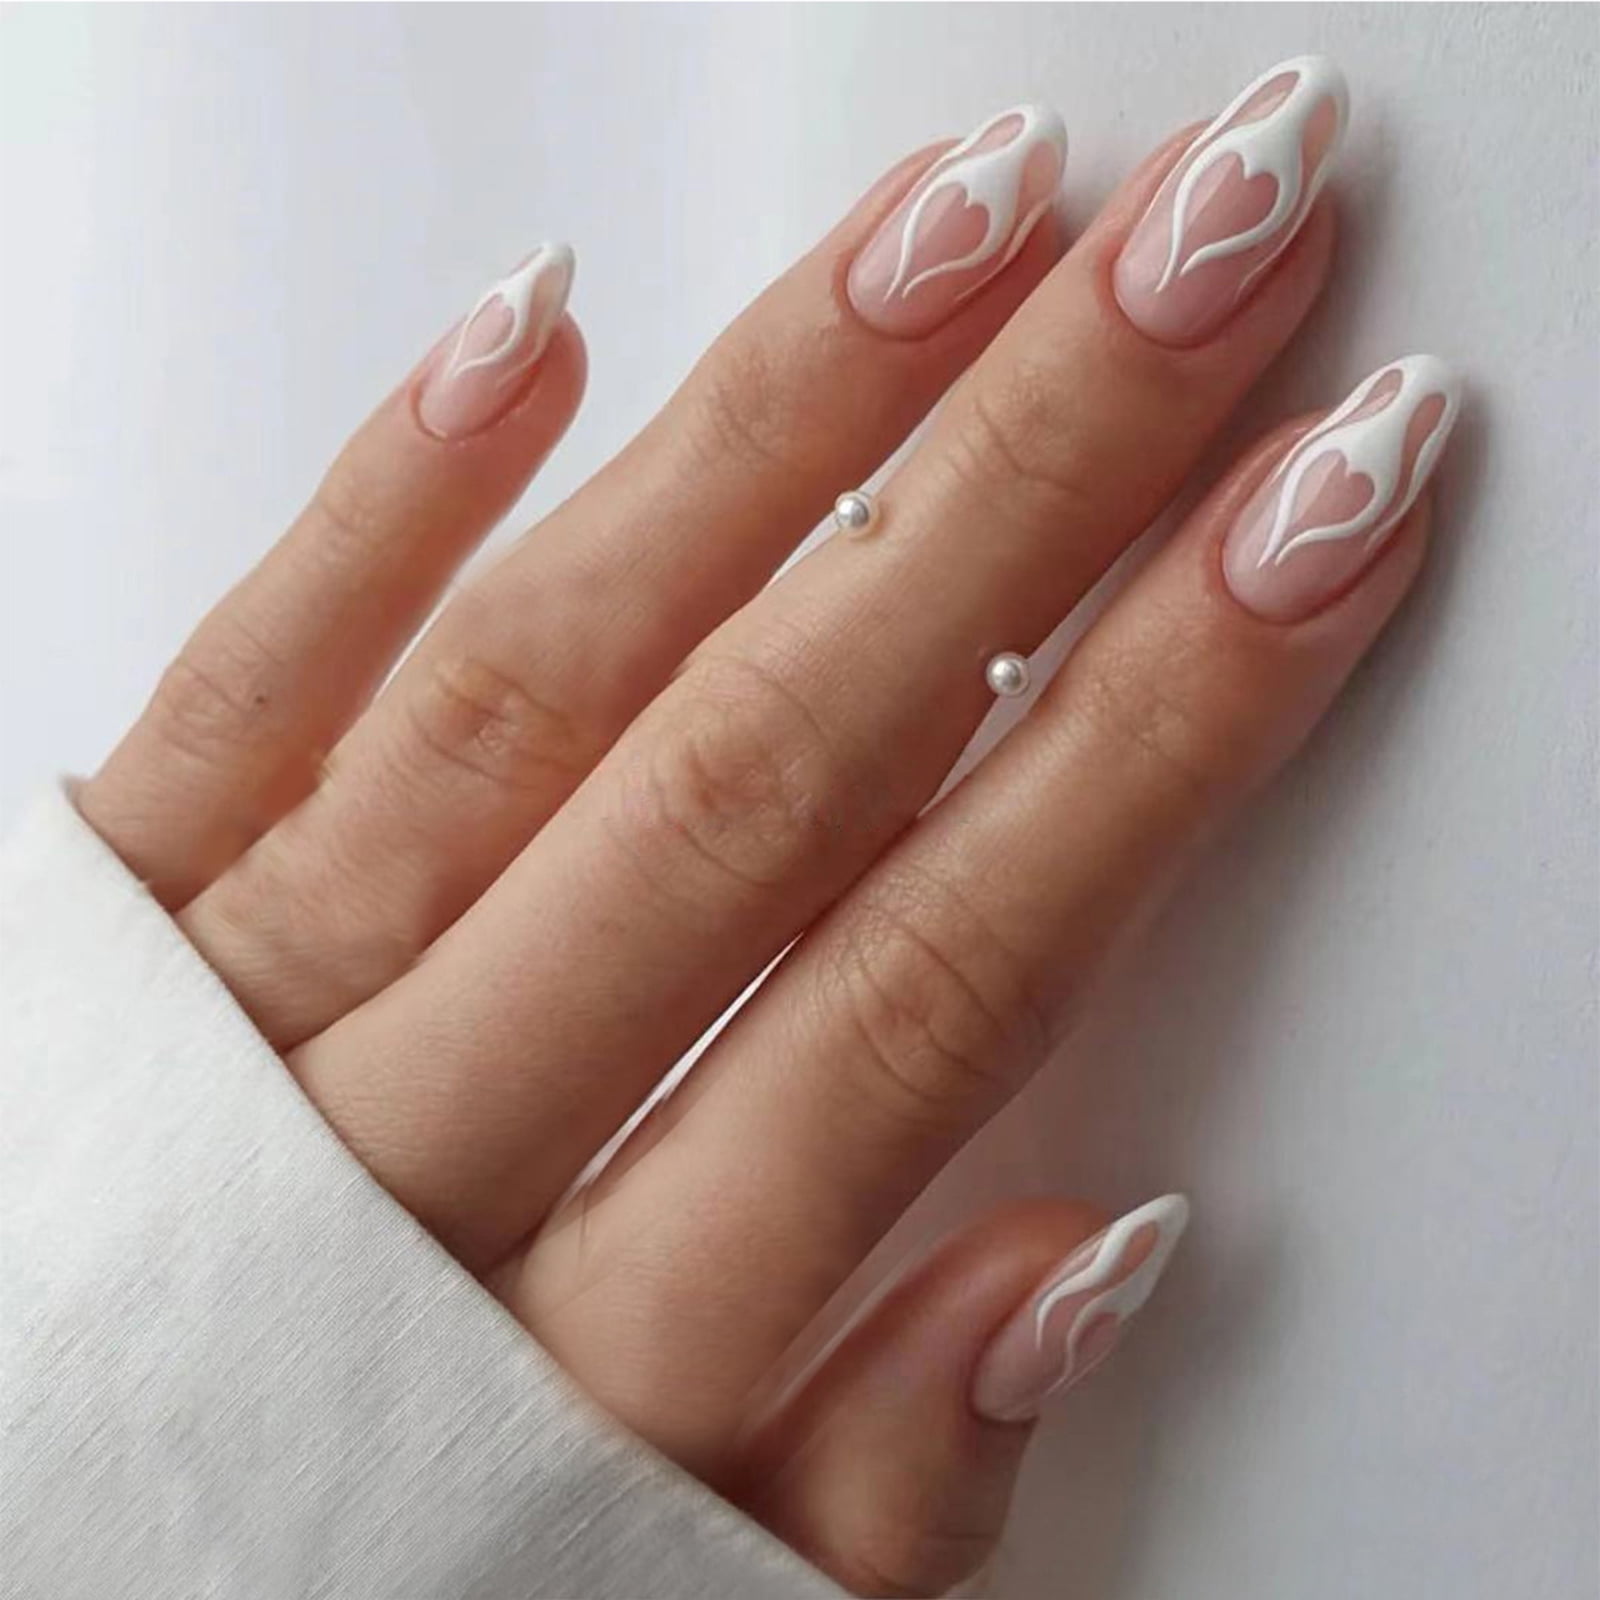 Buy Secret Lives designer artificial nails extension transparent nail with  white color design on the top 24 pieces set with manicure kit convenient  than manicure Online at Low Prices in India -